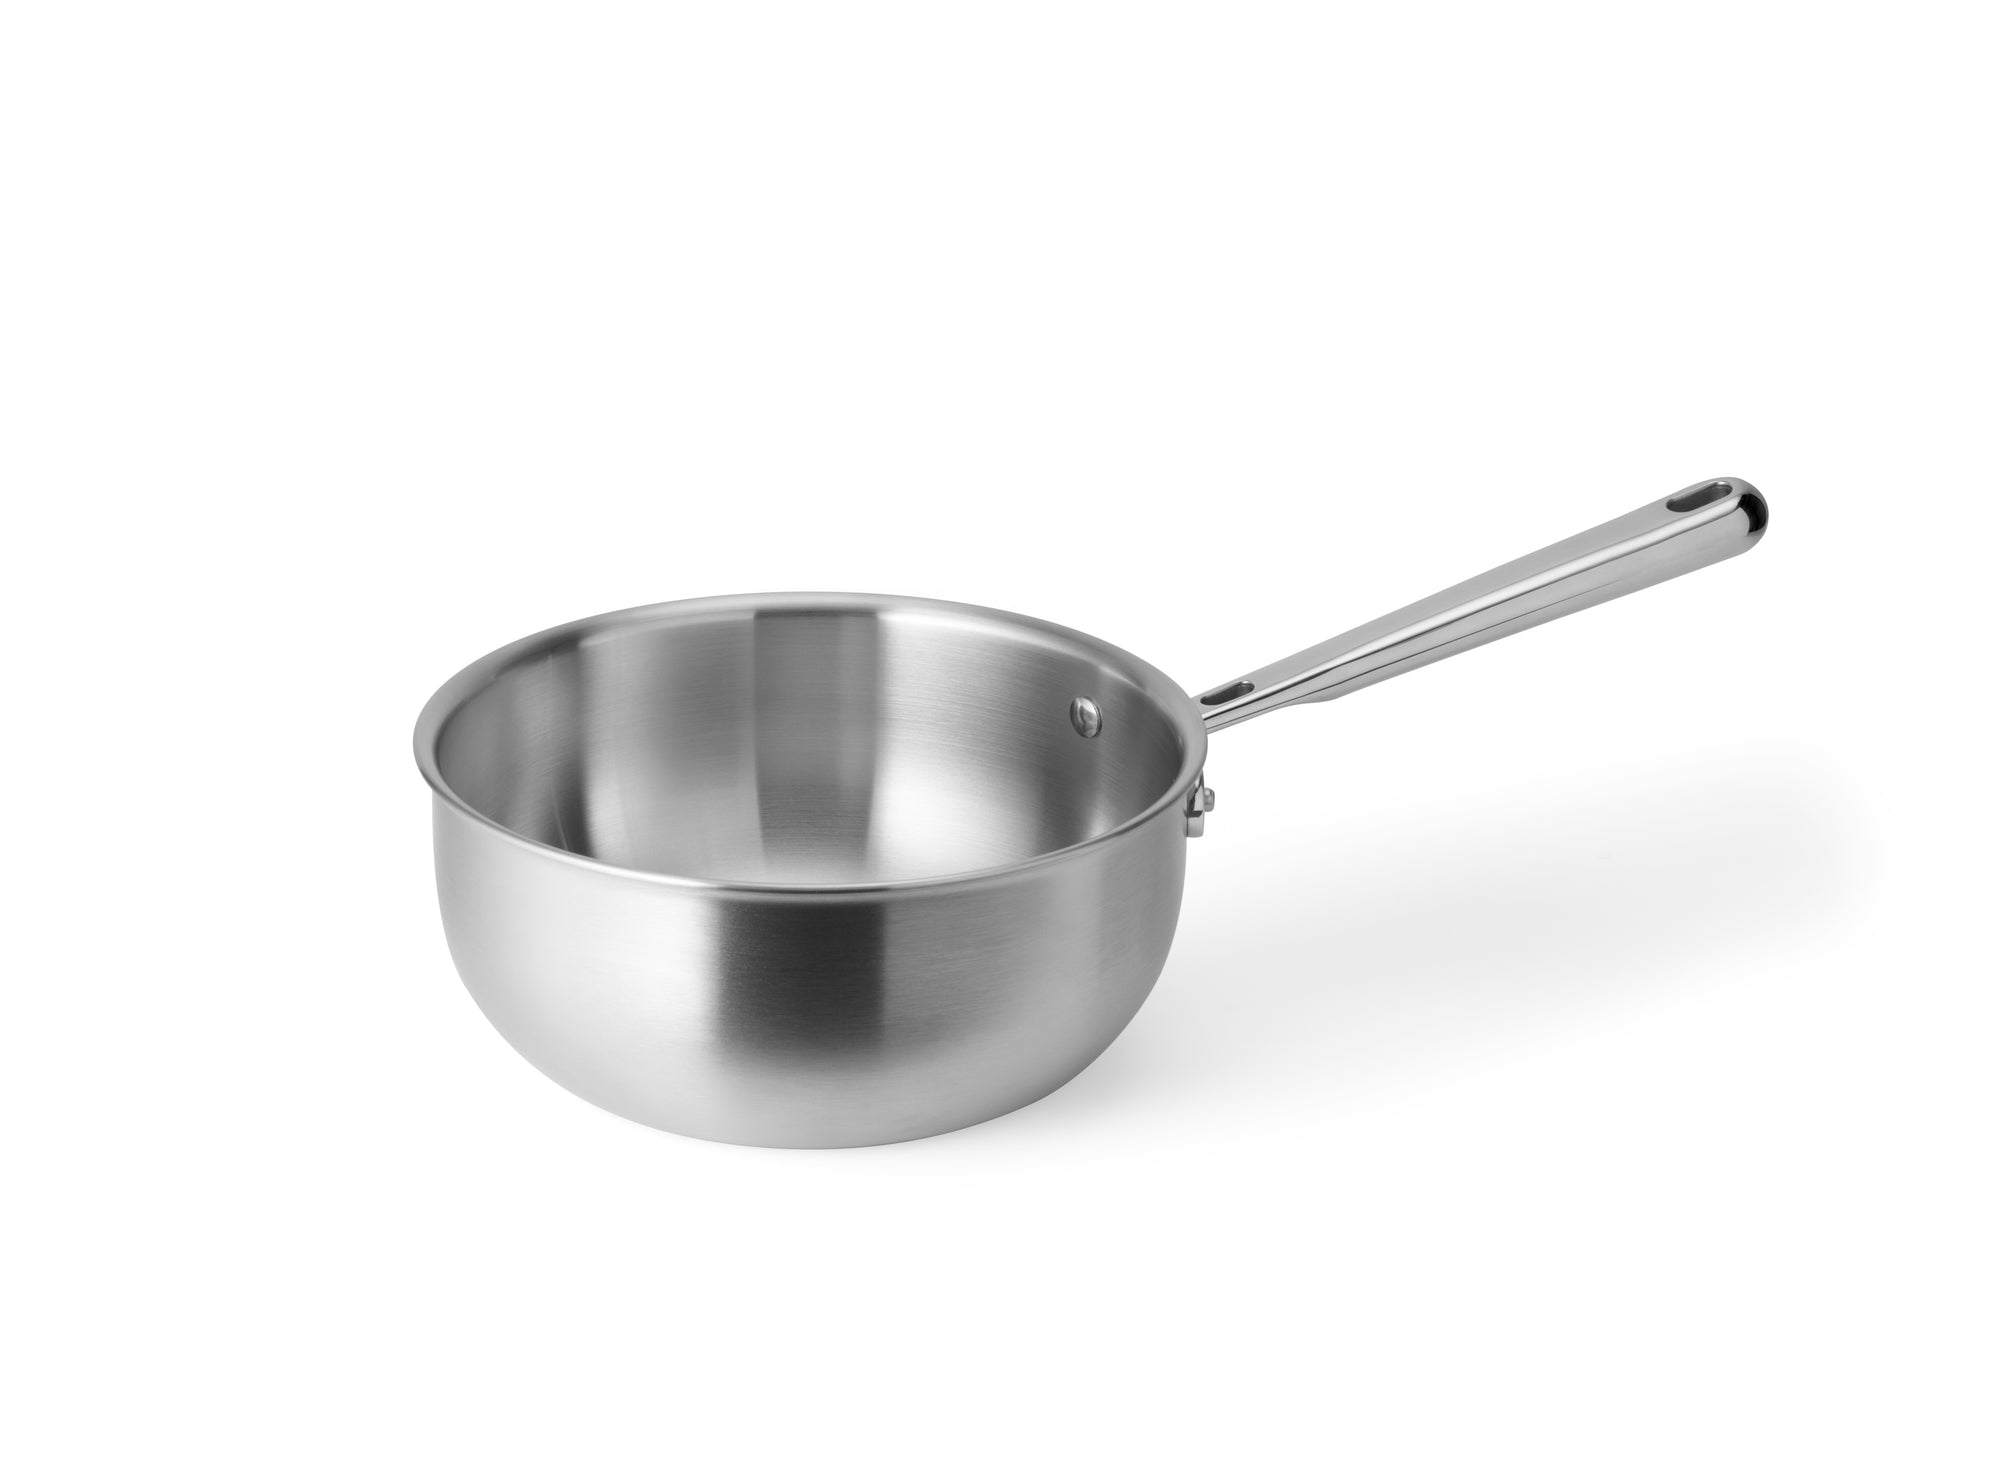 Misen 3 QT Stainless Steel Saucier Pan with Lid - 5-Ply Steel